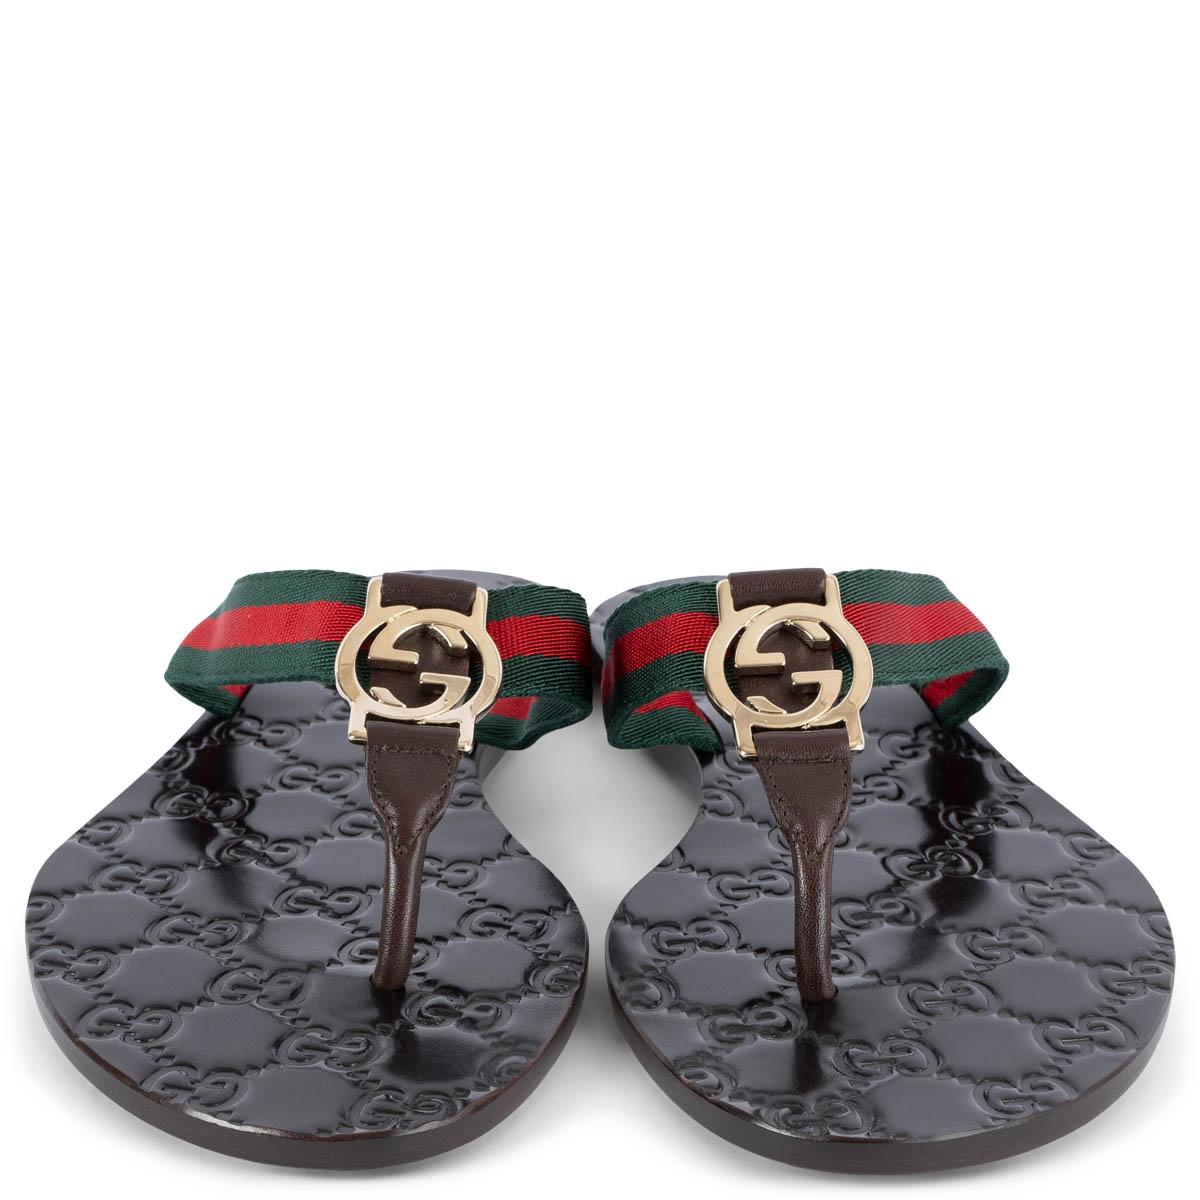 100% authentic Gucci GG thong web sandals in espresso brown monogram leather with signature web-stripe in green and red. Embellished with light gold-tone GG buckle. Have been worn once inside and are in virtually new